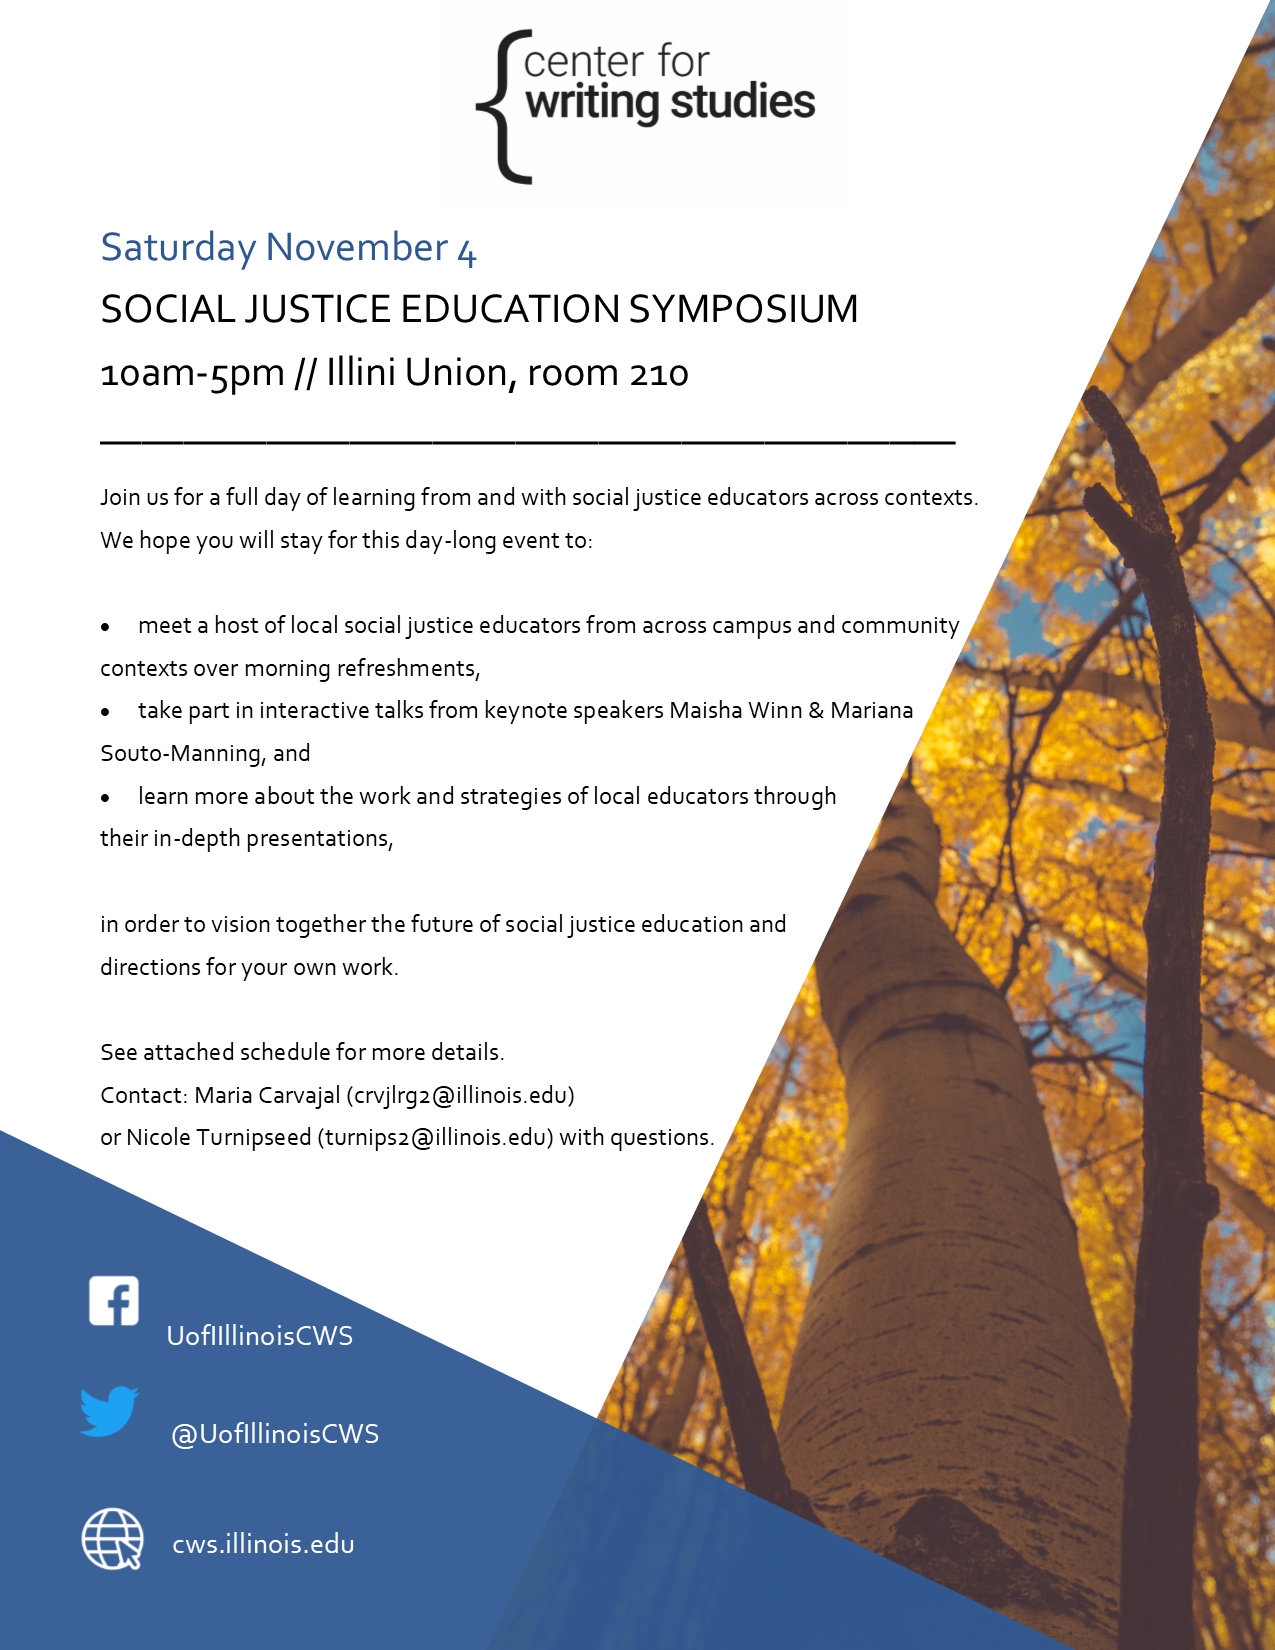 Event flyer with white, yellow, and blue background with autumnal trees in the right-hand frame of the flyer. Text that reads "Social Justice Education Symposium" with event description and contact information appears below.